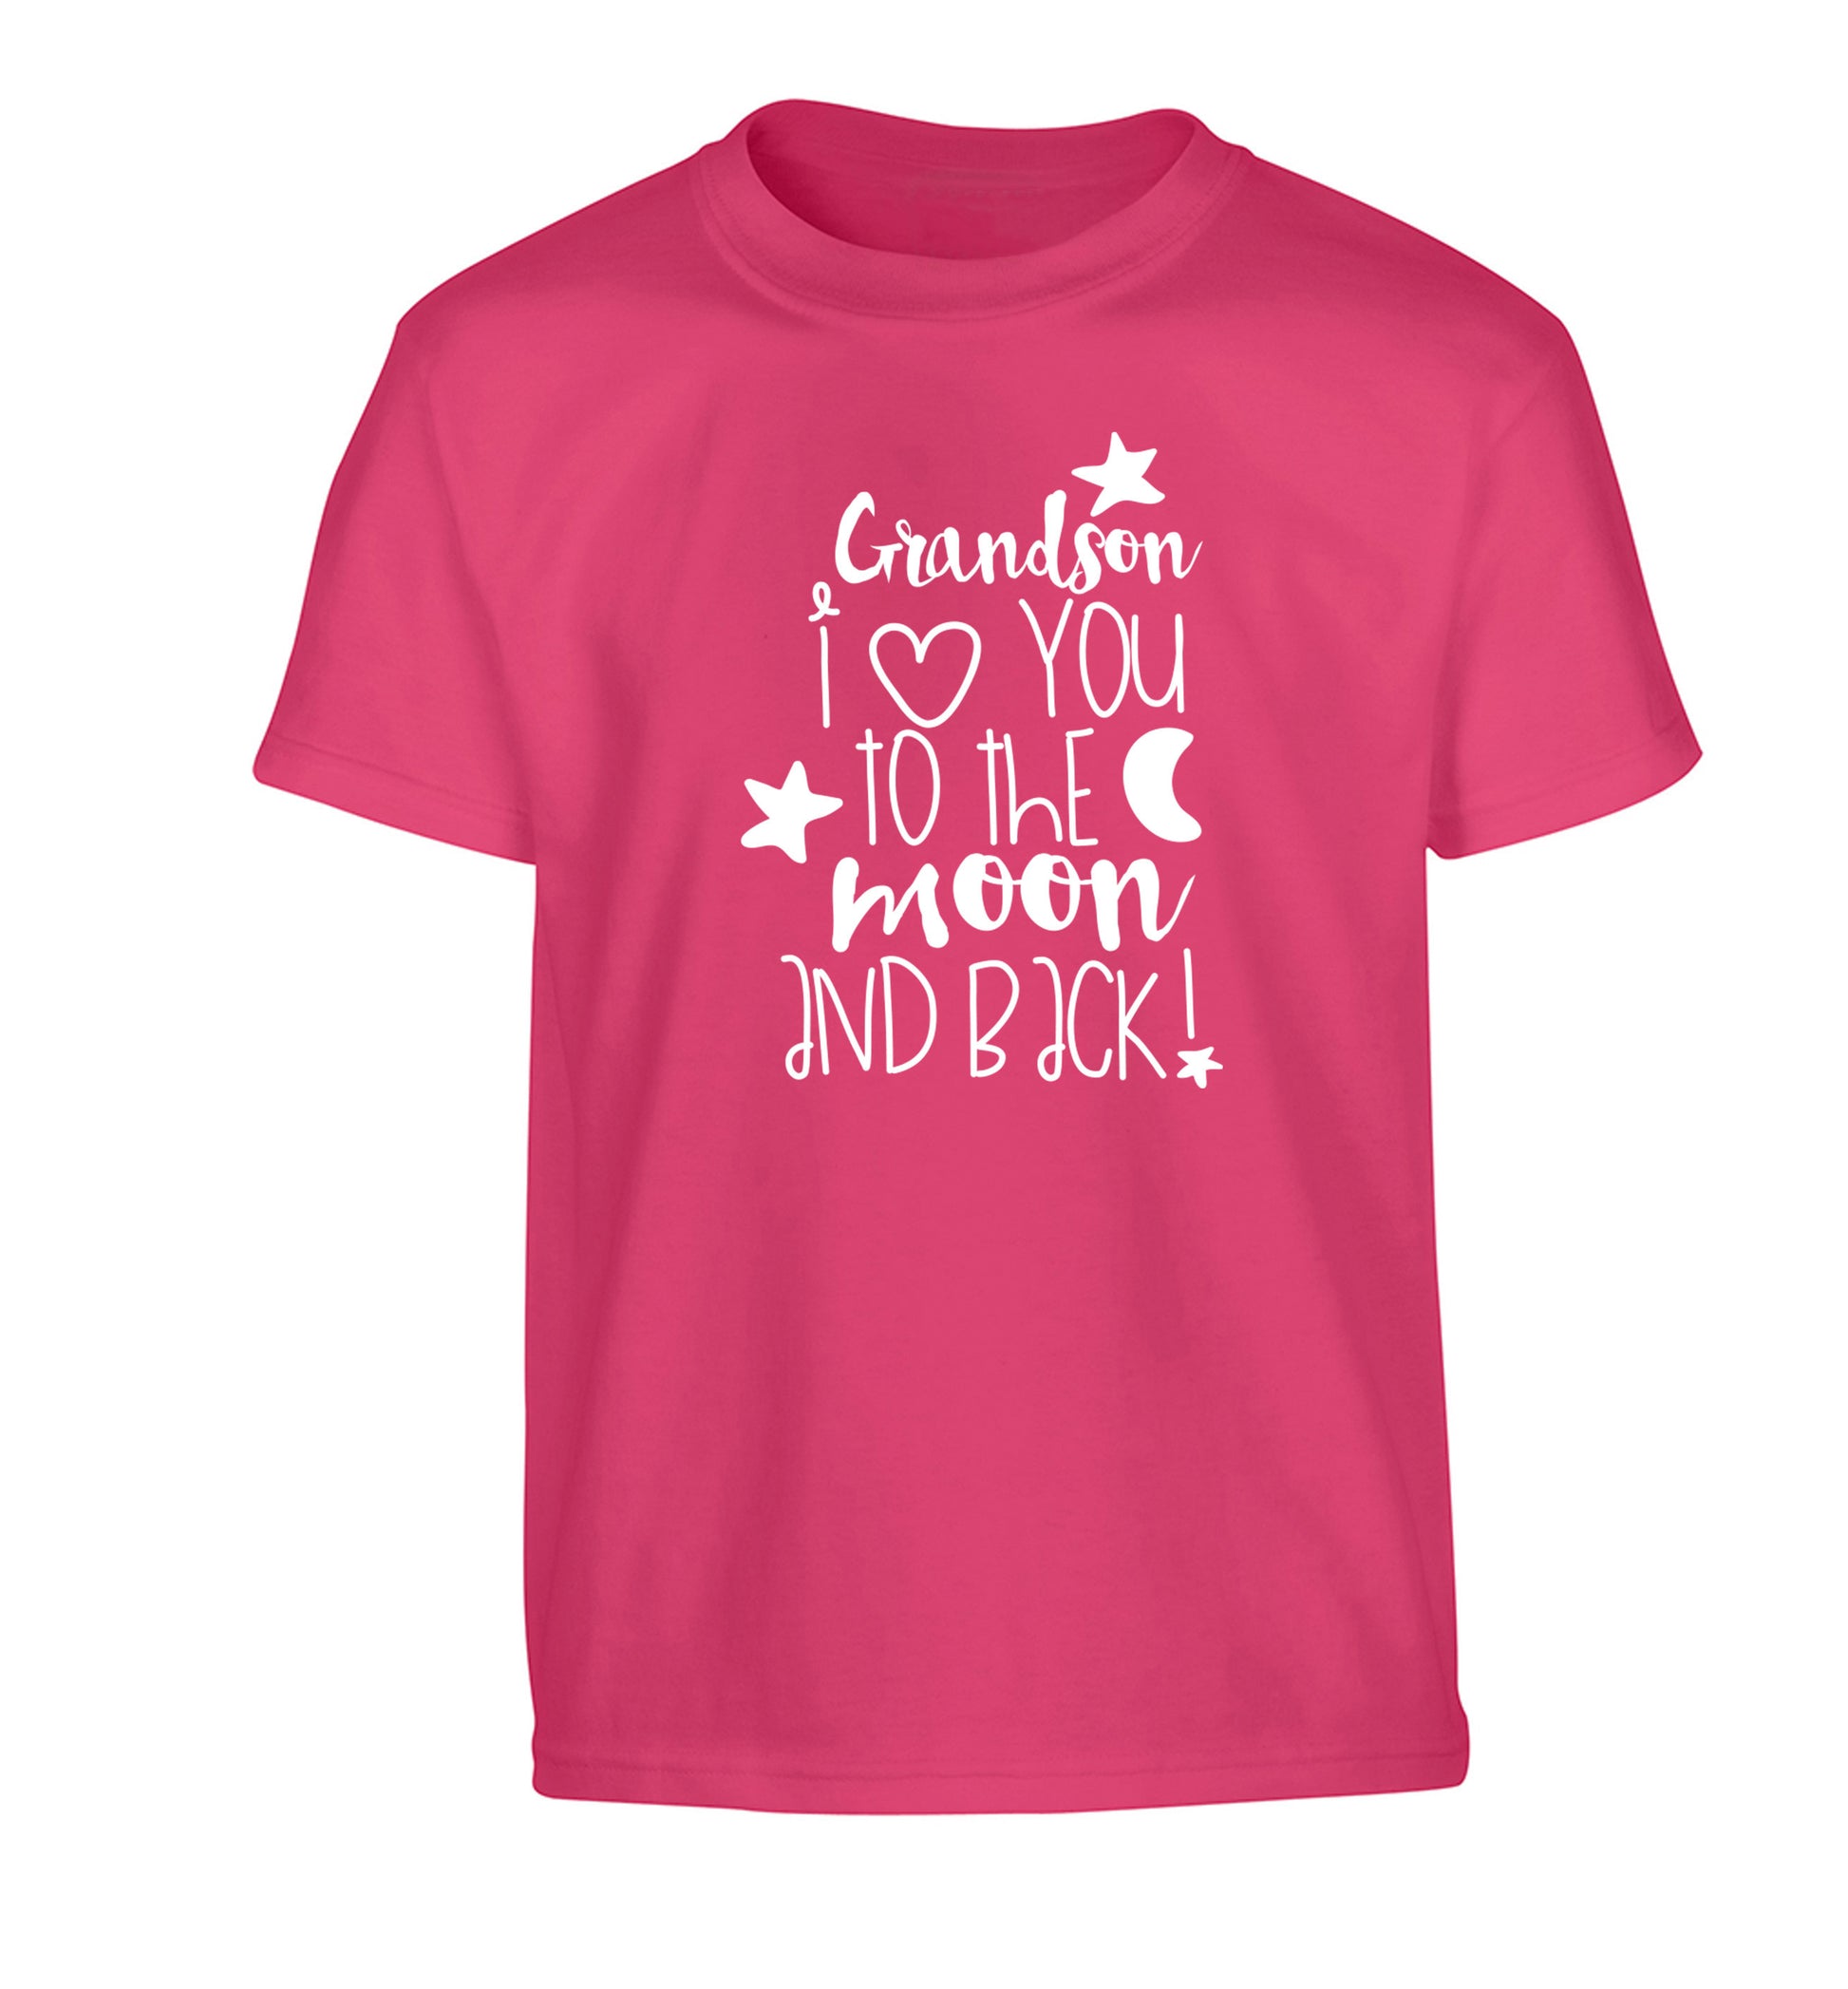 Grandson I love you to the moon and back Children's pink Tshirt 12-14 Years